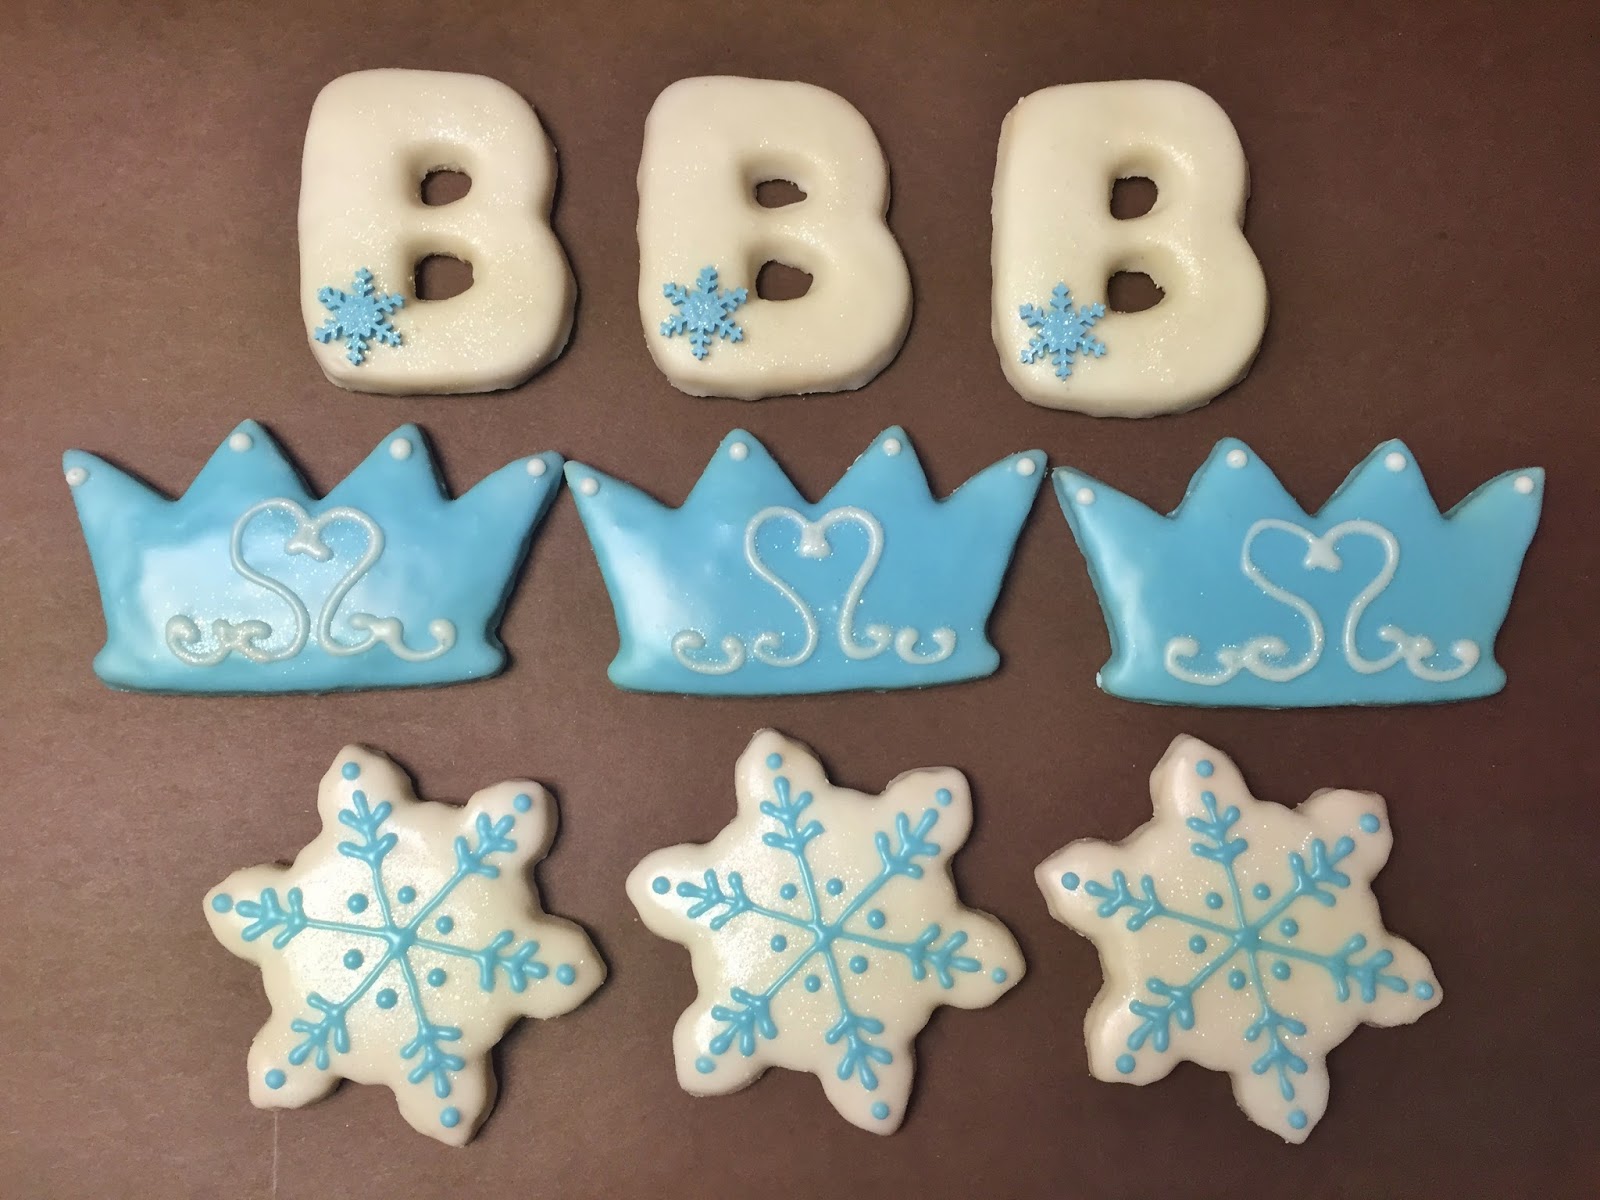 Cakes by Mindy: Frozen Themed Cookies